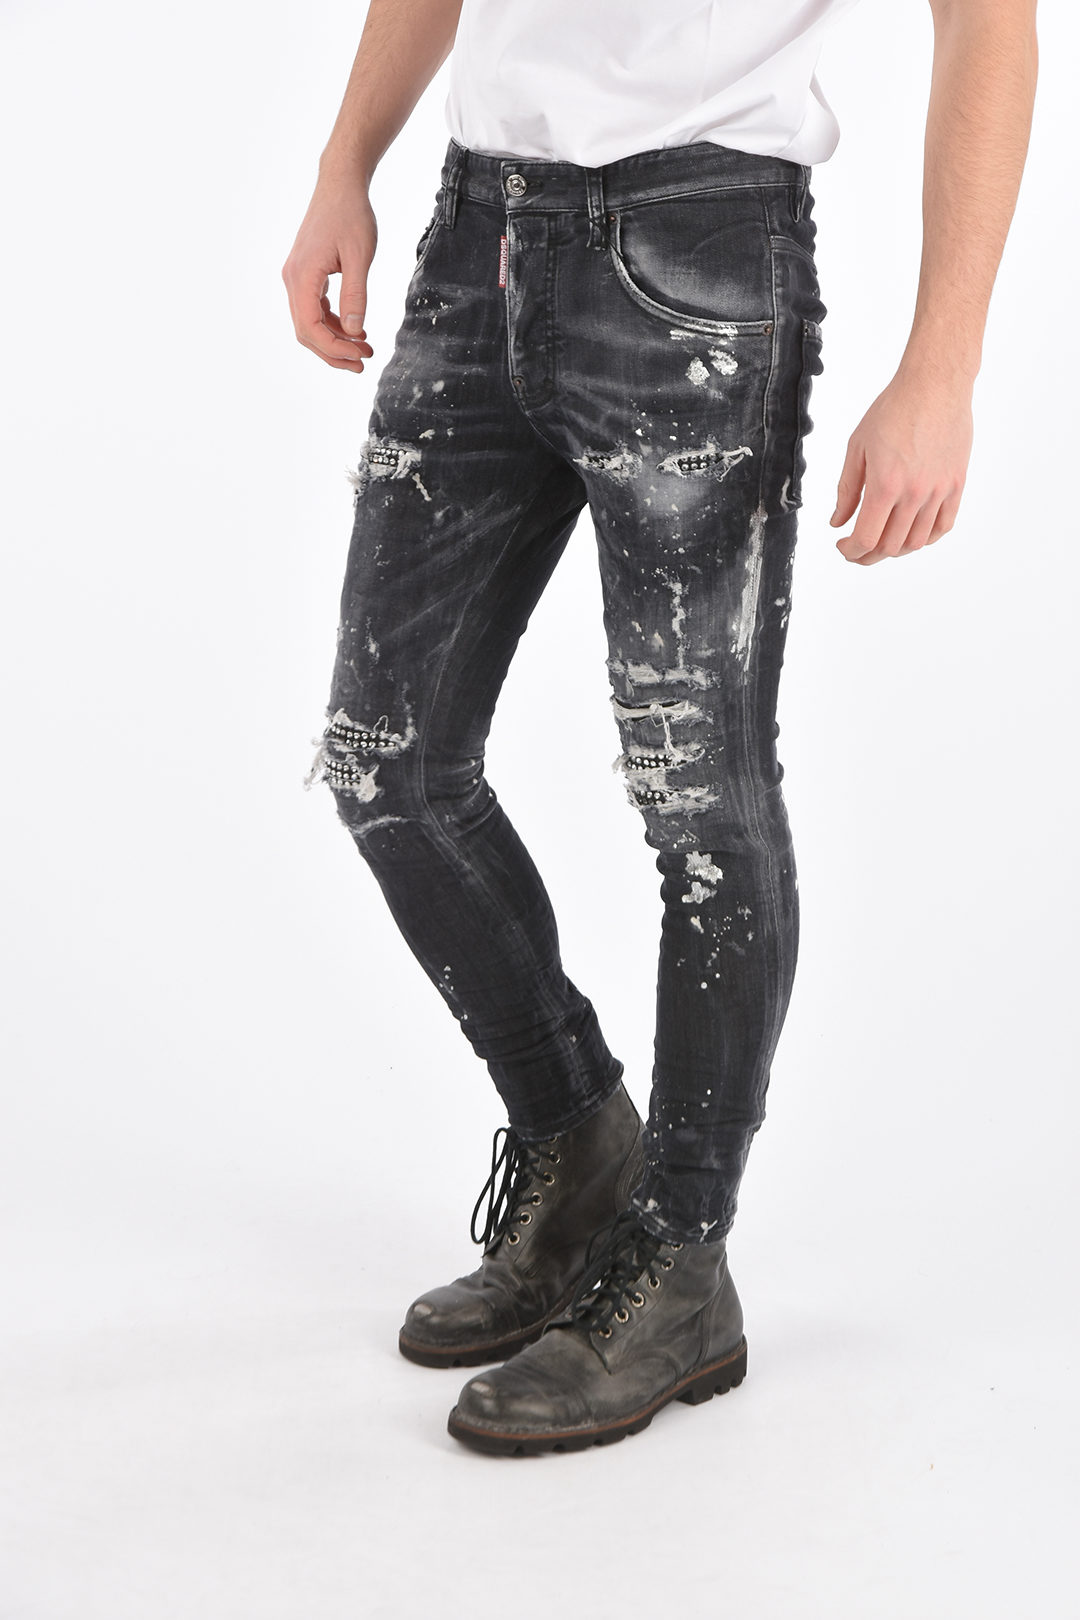 Bounce Perpetual sake Dsquared2 Distressed SUPER TWINKY FIT Denims with Strass men - Glamood  Outlet